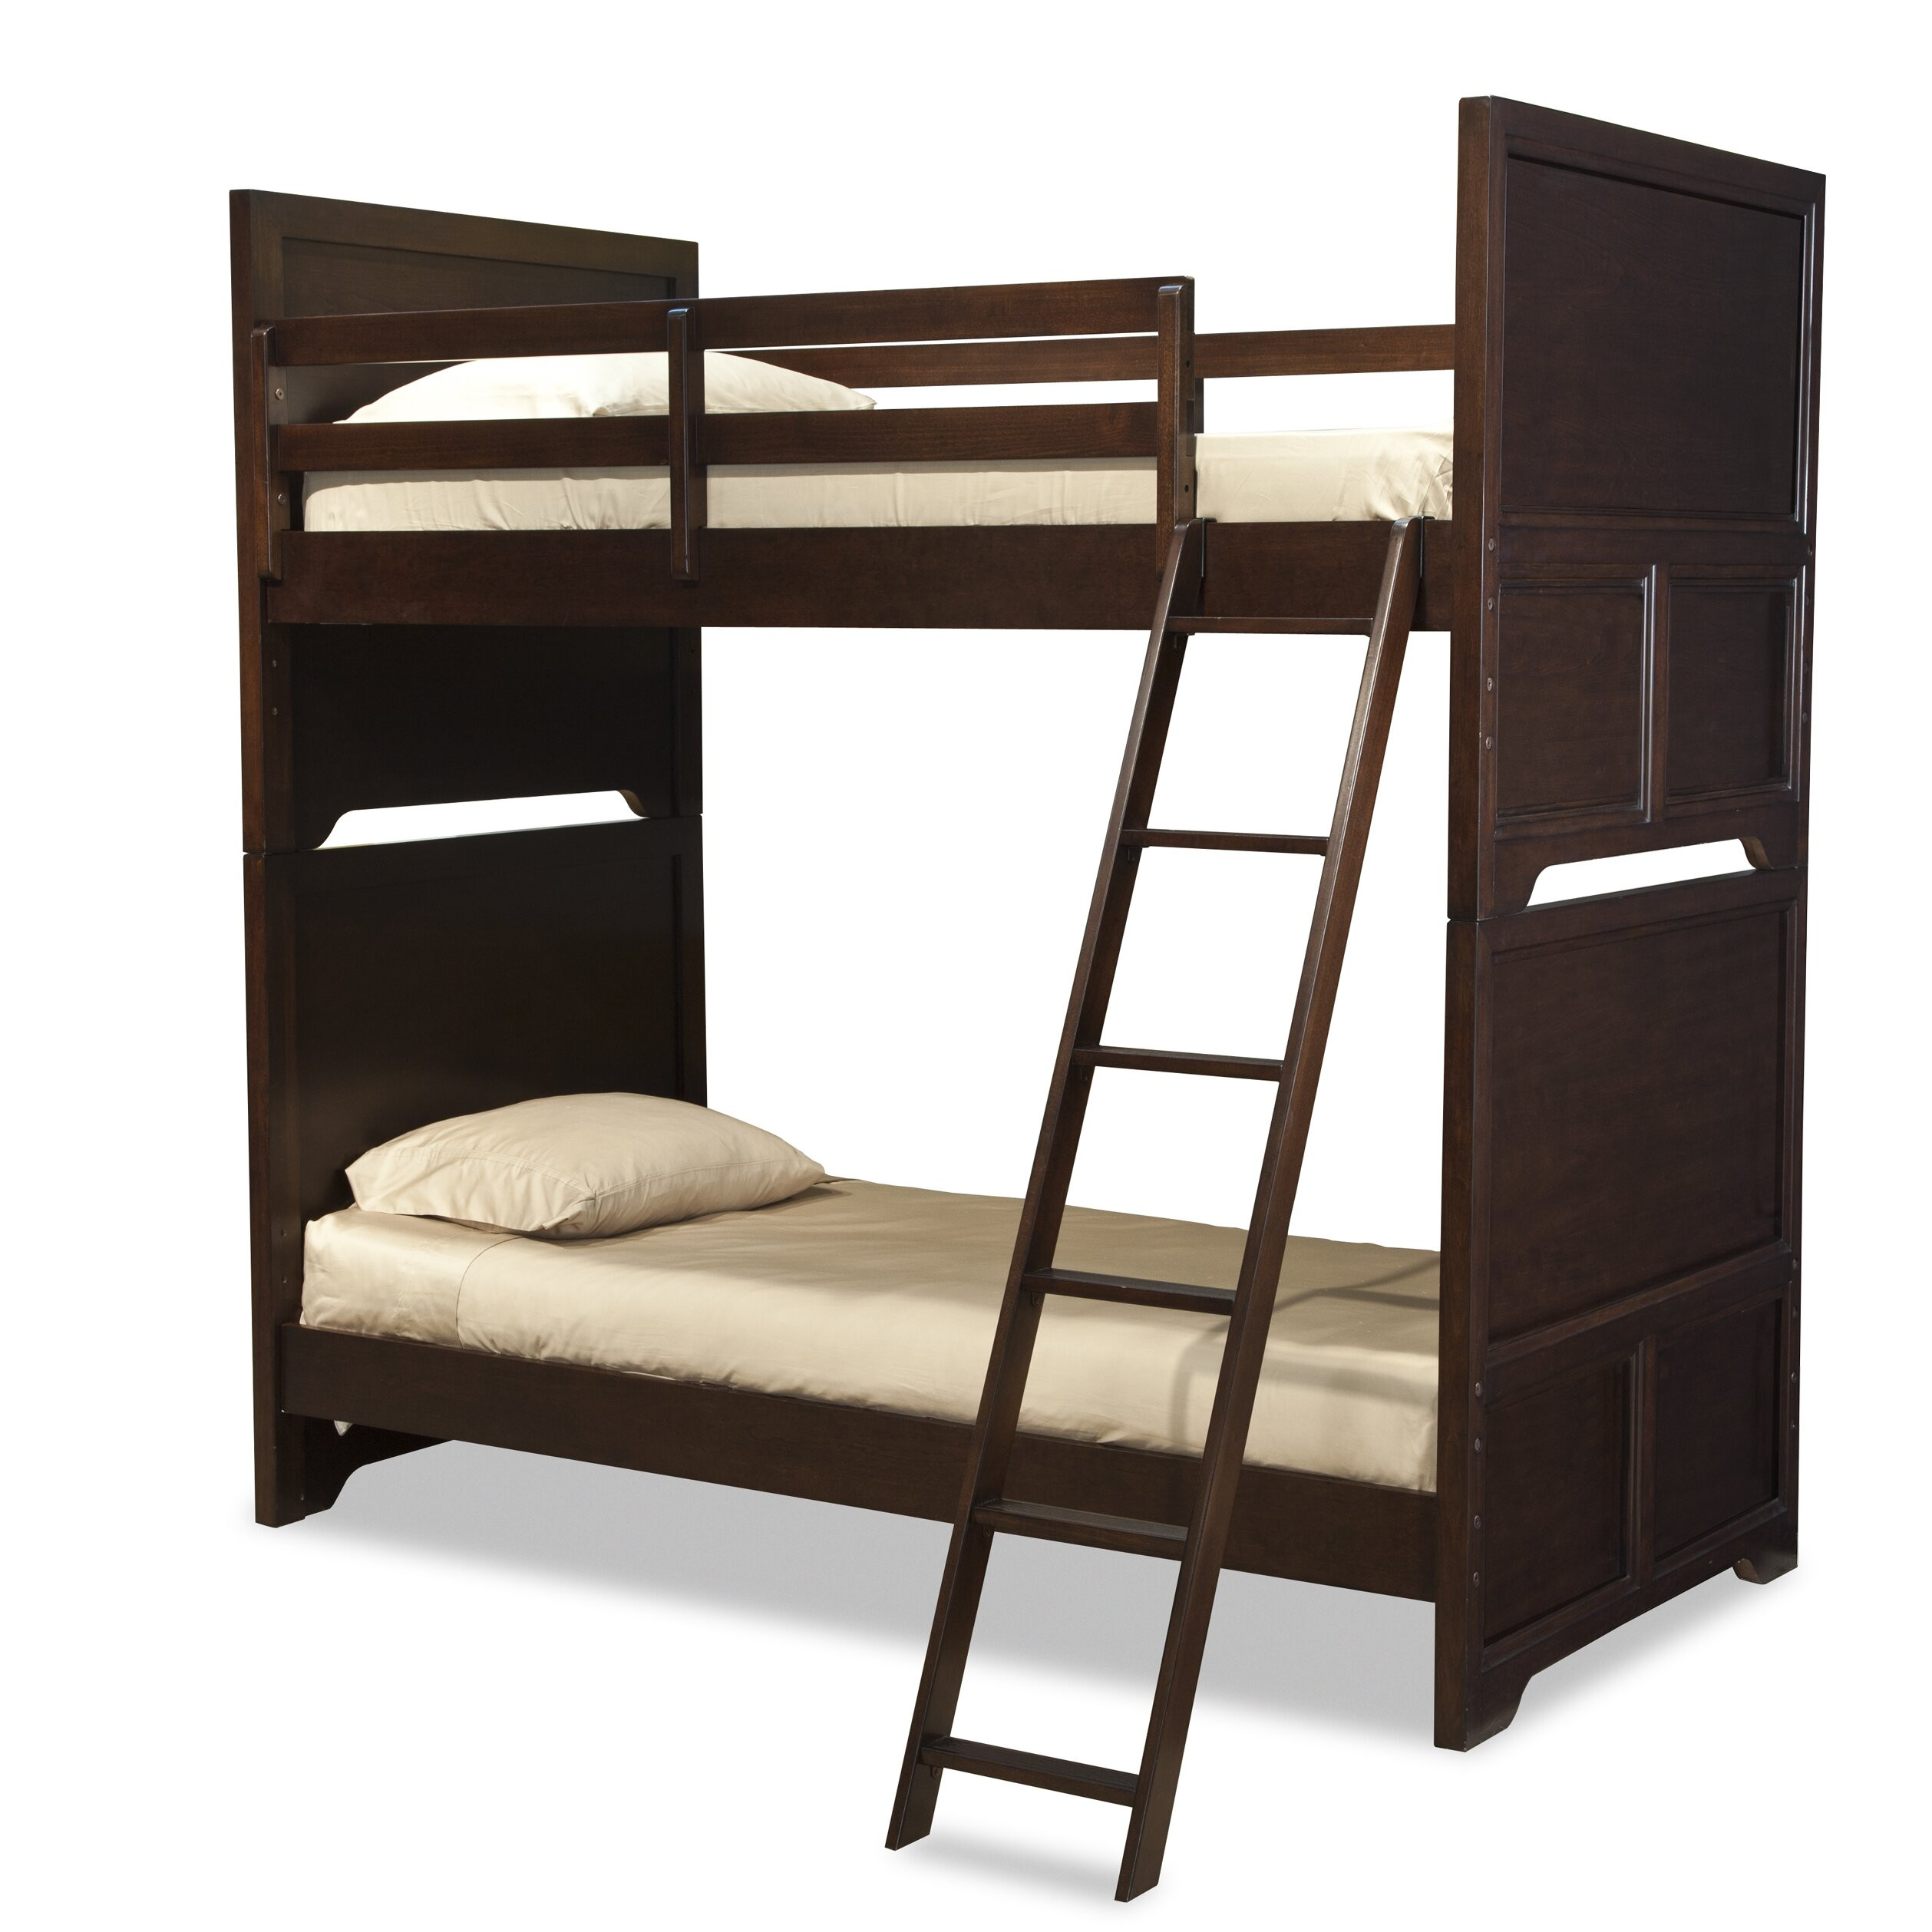 Childrens Beds With Underbed Storage
 LC Kids Benchmark Twin over Twin Standard Bunk Bed with